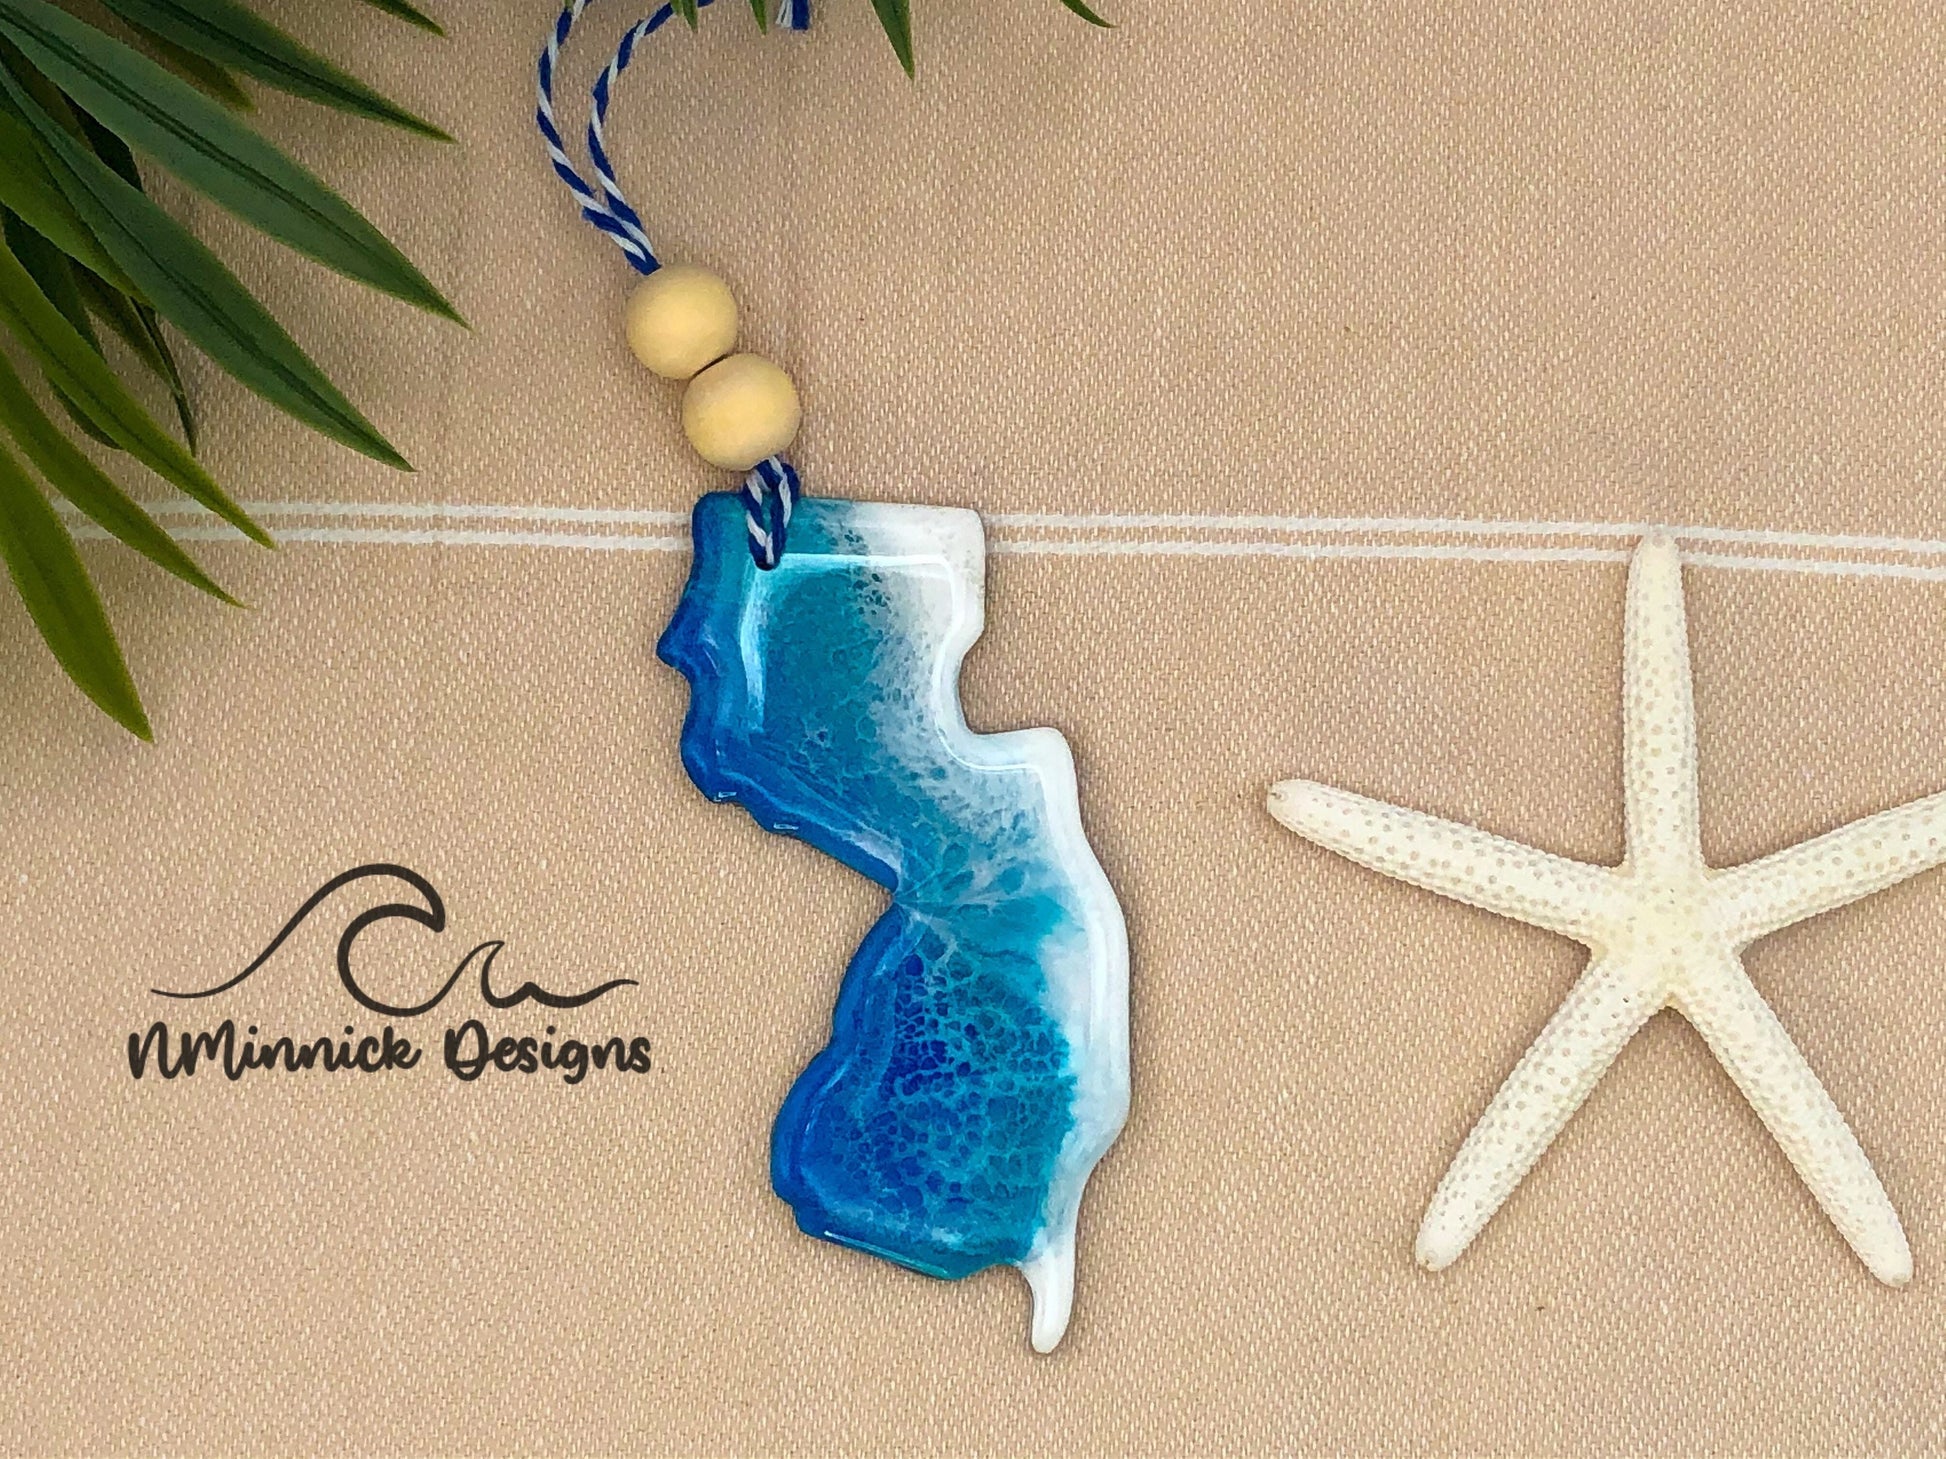 New Jersey-shaped wooden Christmas ornament covered in blue and teal colored ocean resin art resembling the waves along New Jersey&#39;s Atlantic Coast. Finished with blue and white baker&#39;s twine and two wooden beads.